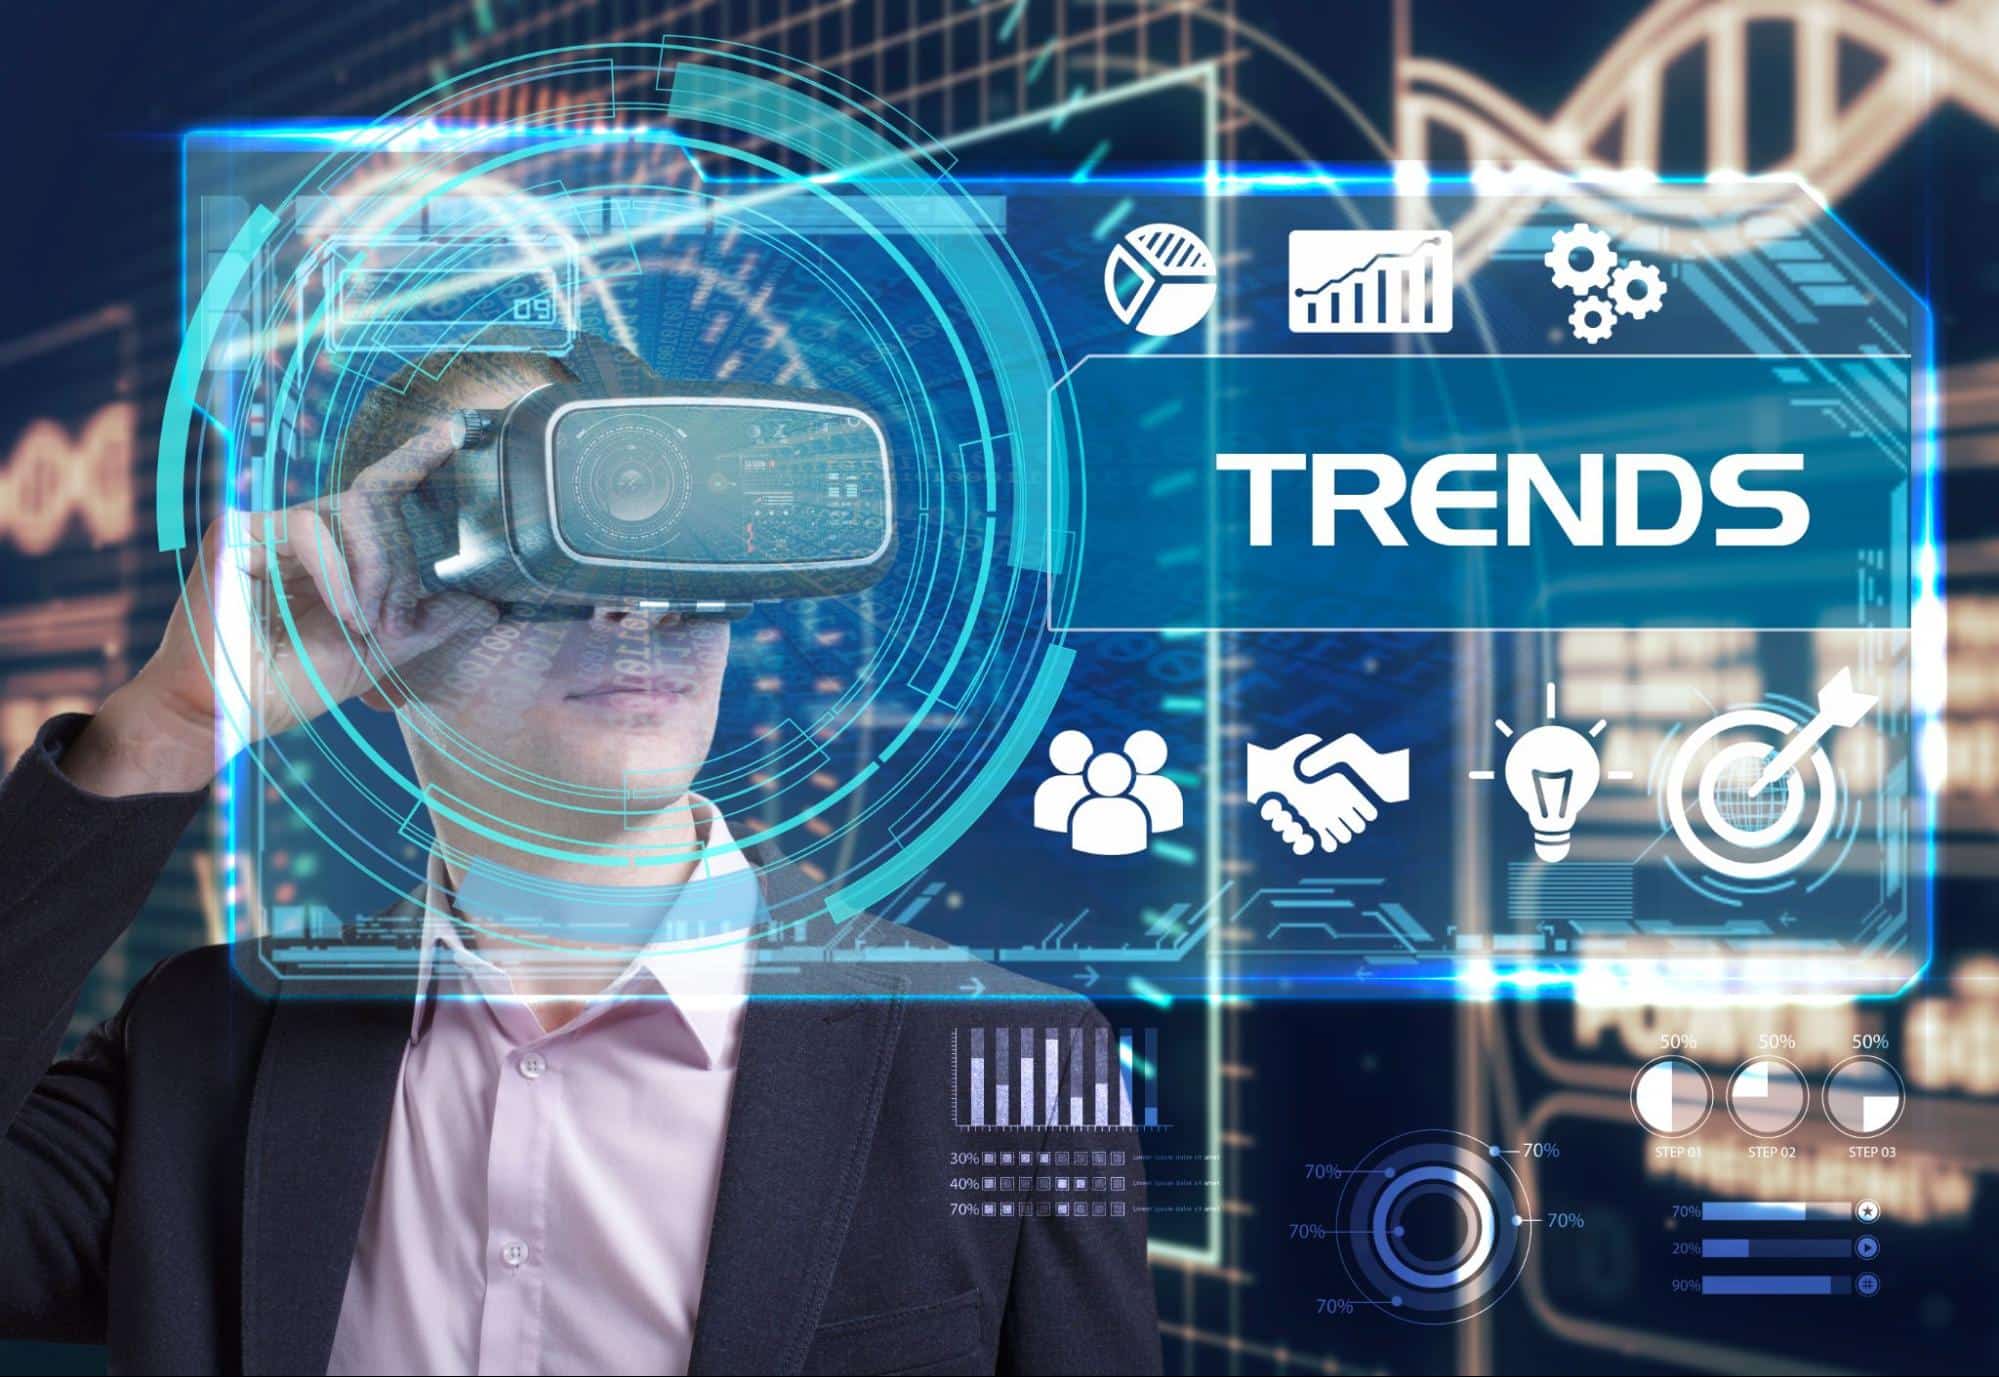 7 Technology Trends Revolutionizing the Way We Work